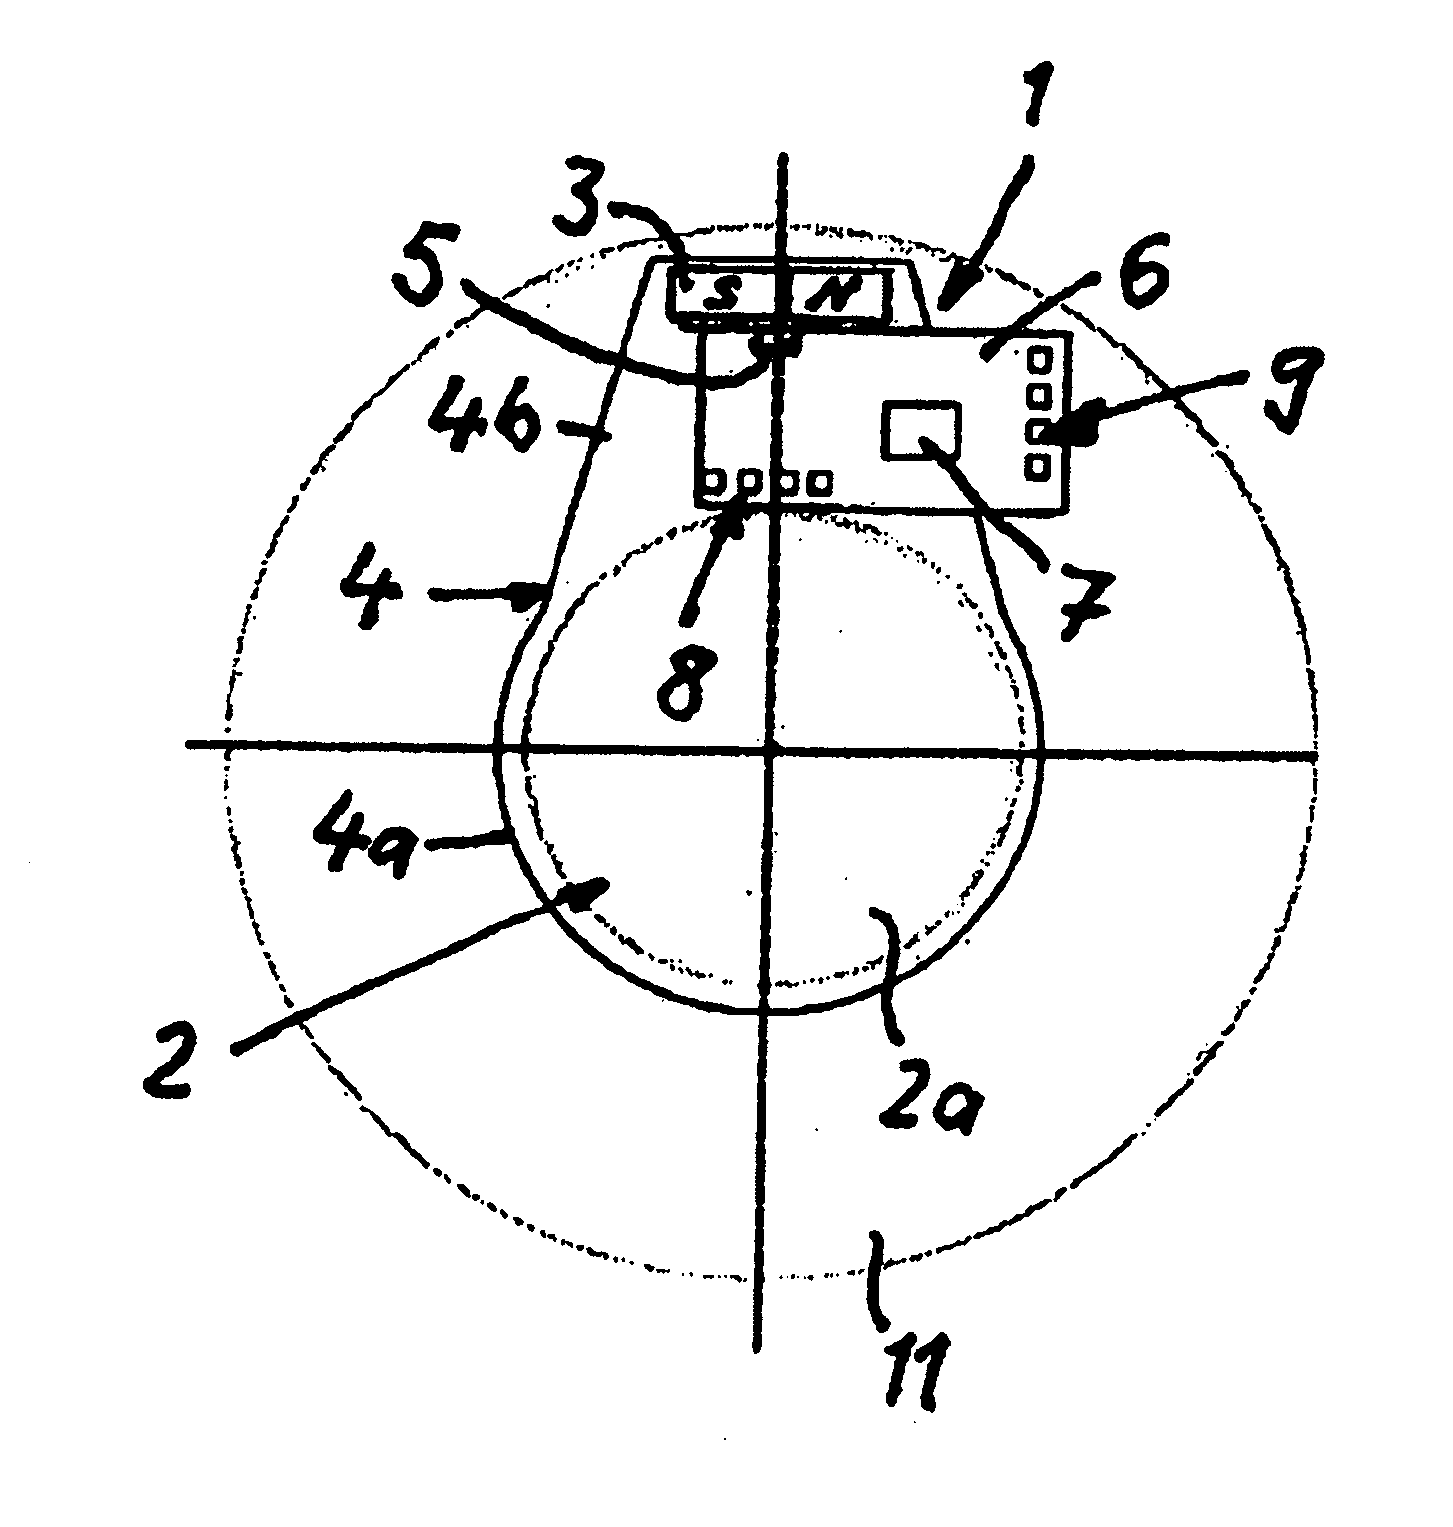 Sensor device for measuring torque in steering systems